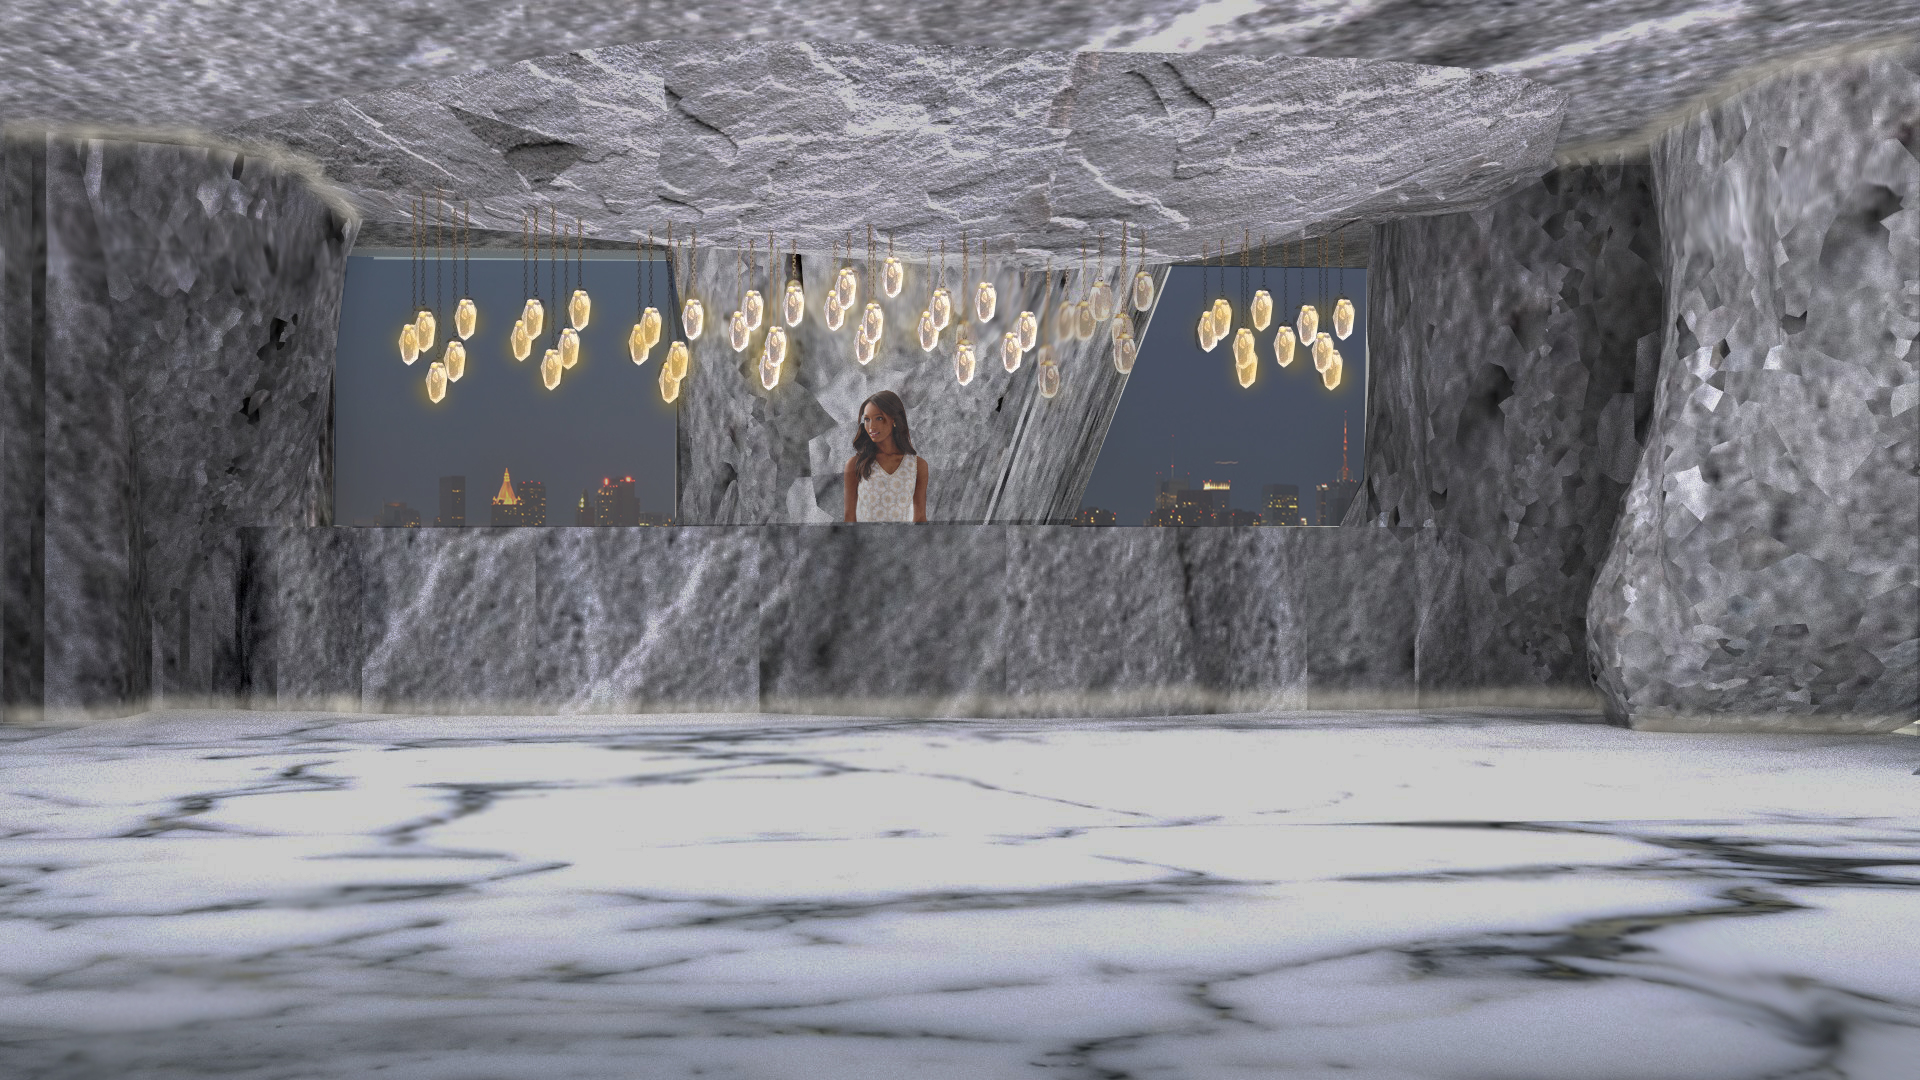 rayna-kanoff-mfa-1-thesis-project--the-cave_34442309394_o.jpg